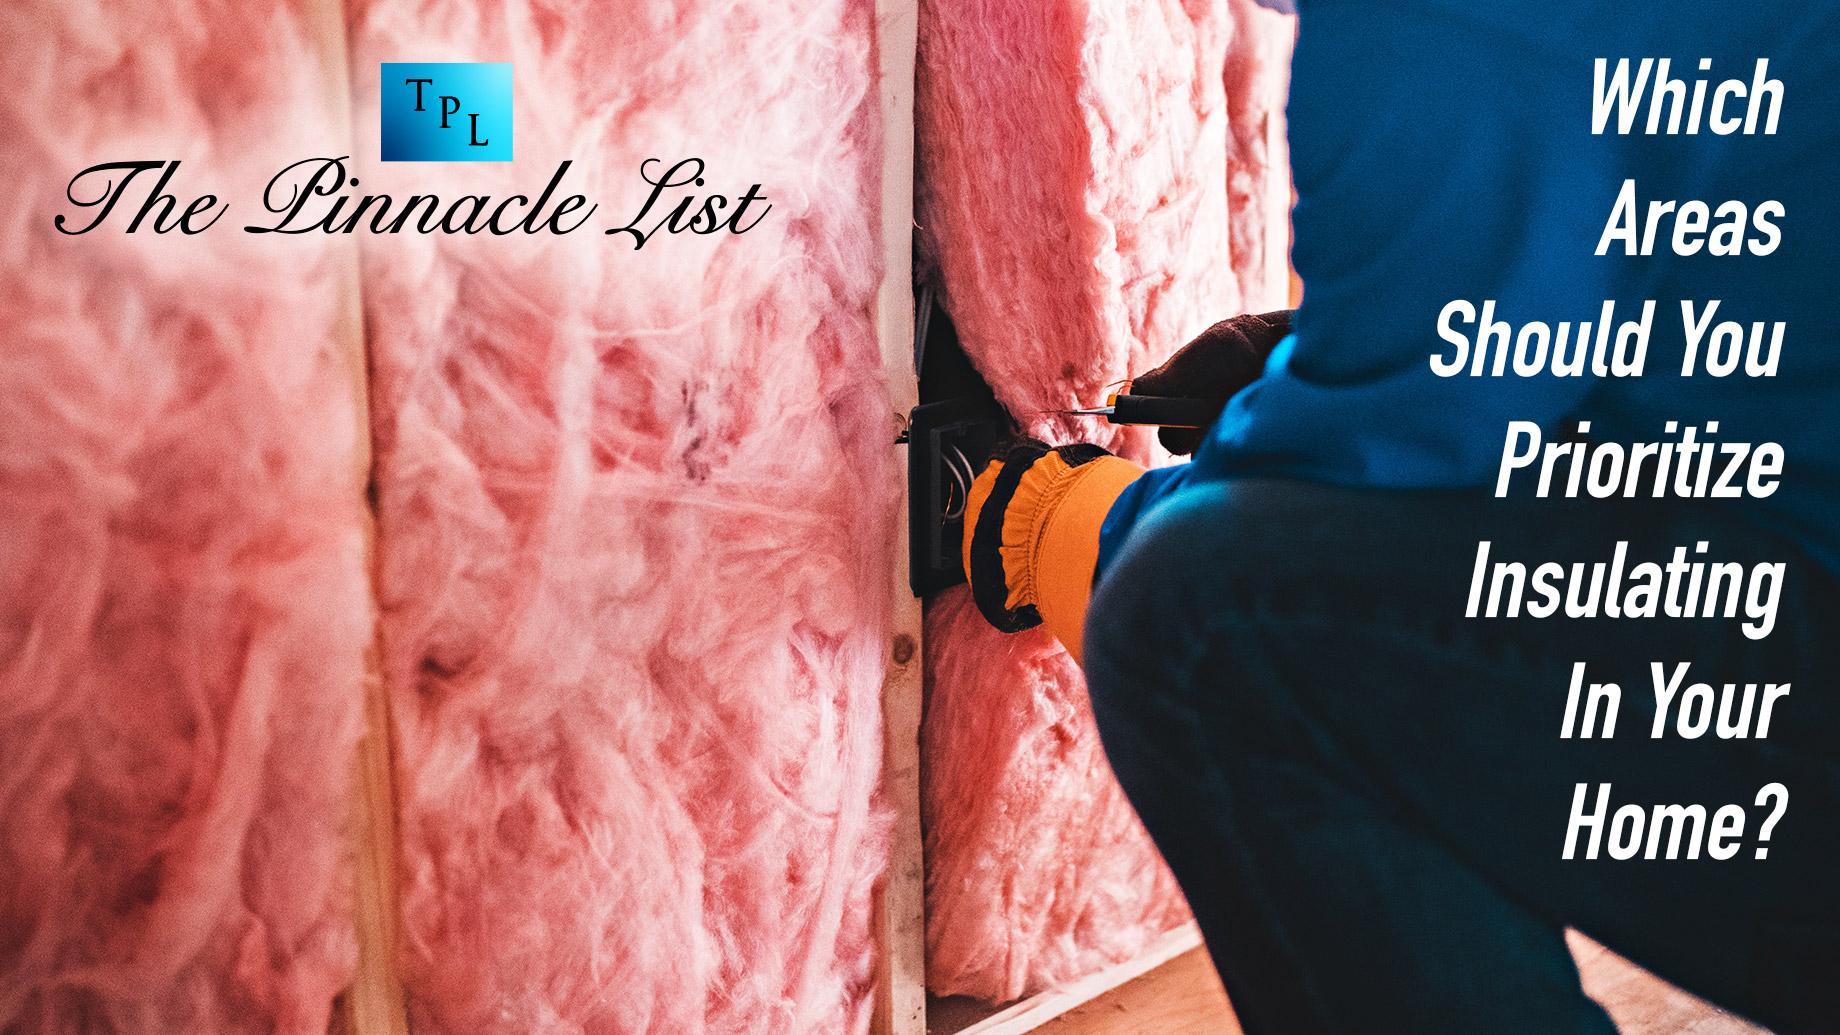 Which Areas Should You Prioritize Insulating In Your Home?